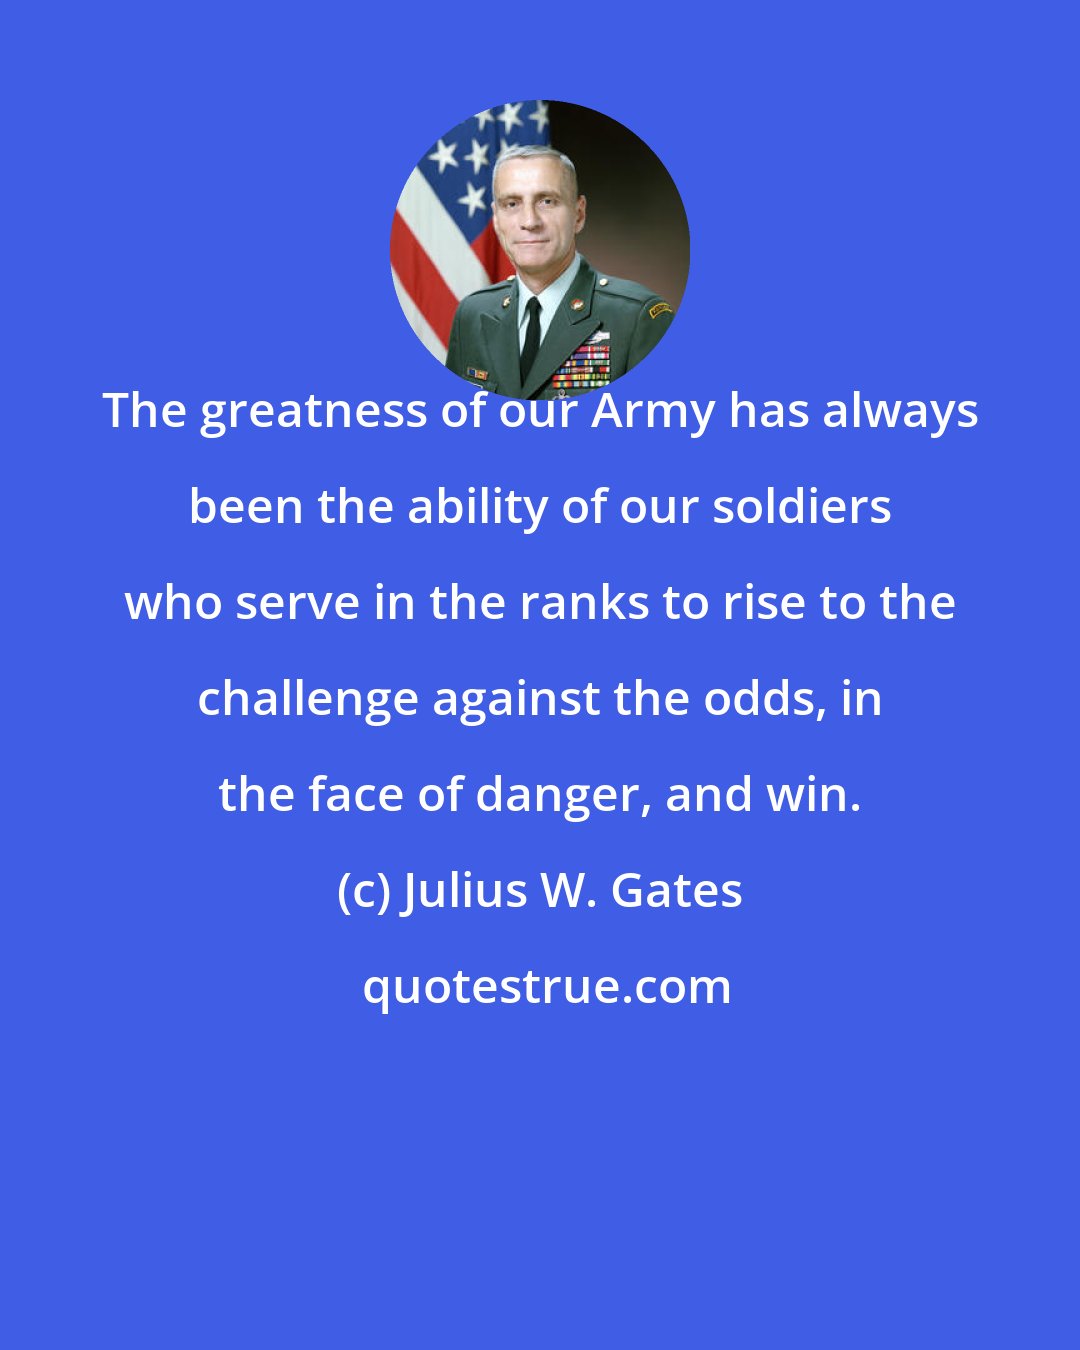 Julius W. Gates: The greatness of our Army has always been the ability of our soldiers who serve in the ranks to rise to the challenge against the odds, in the face of danger, and win.